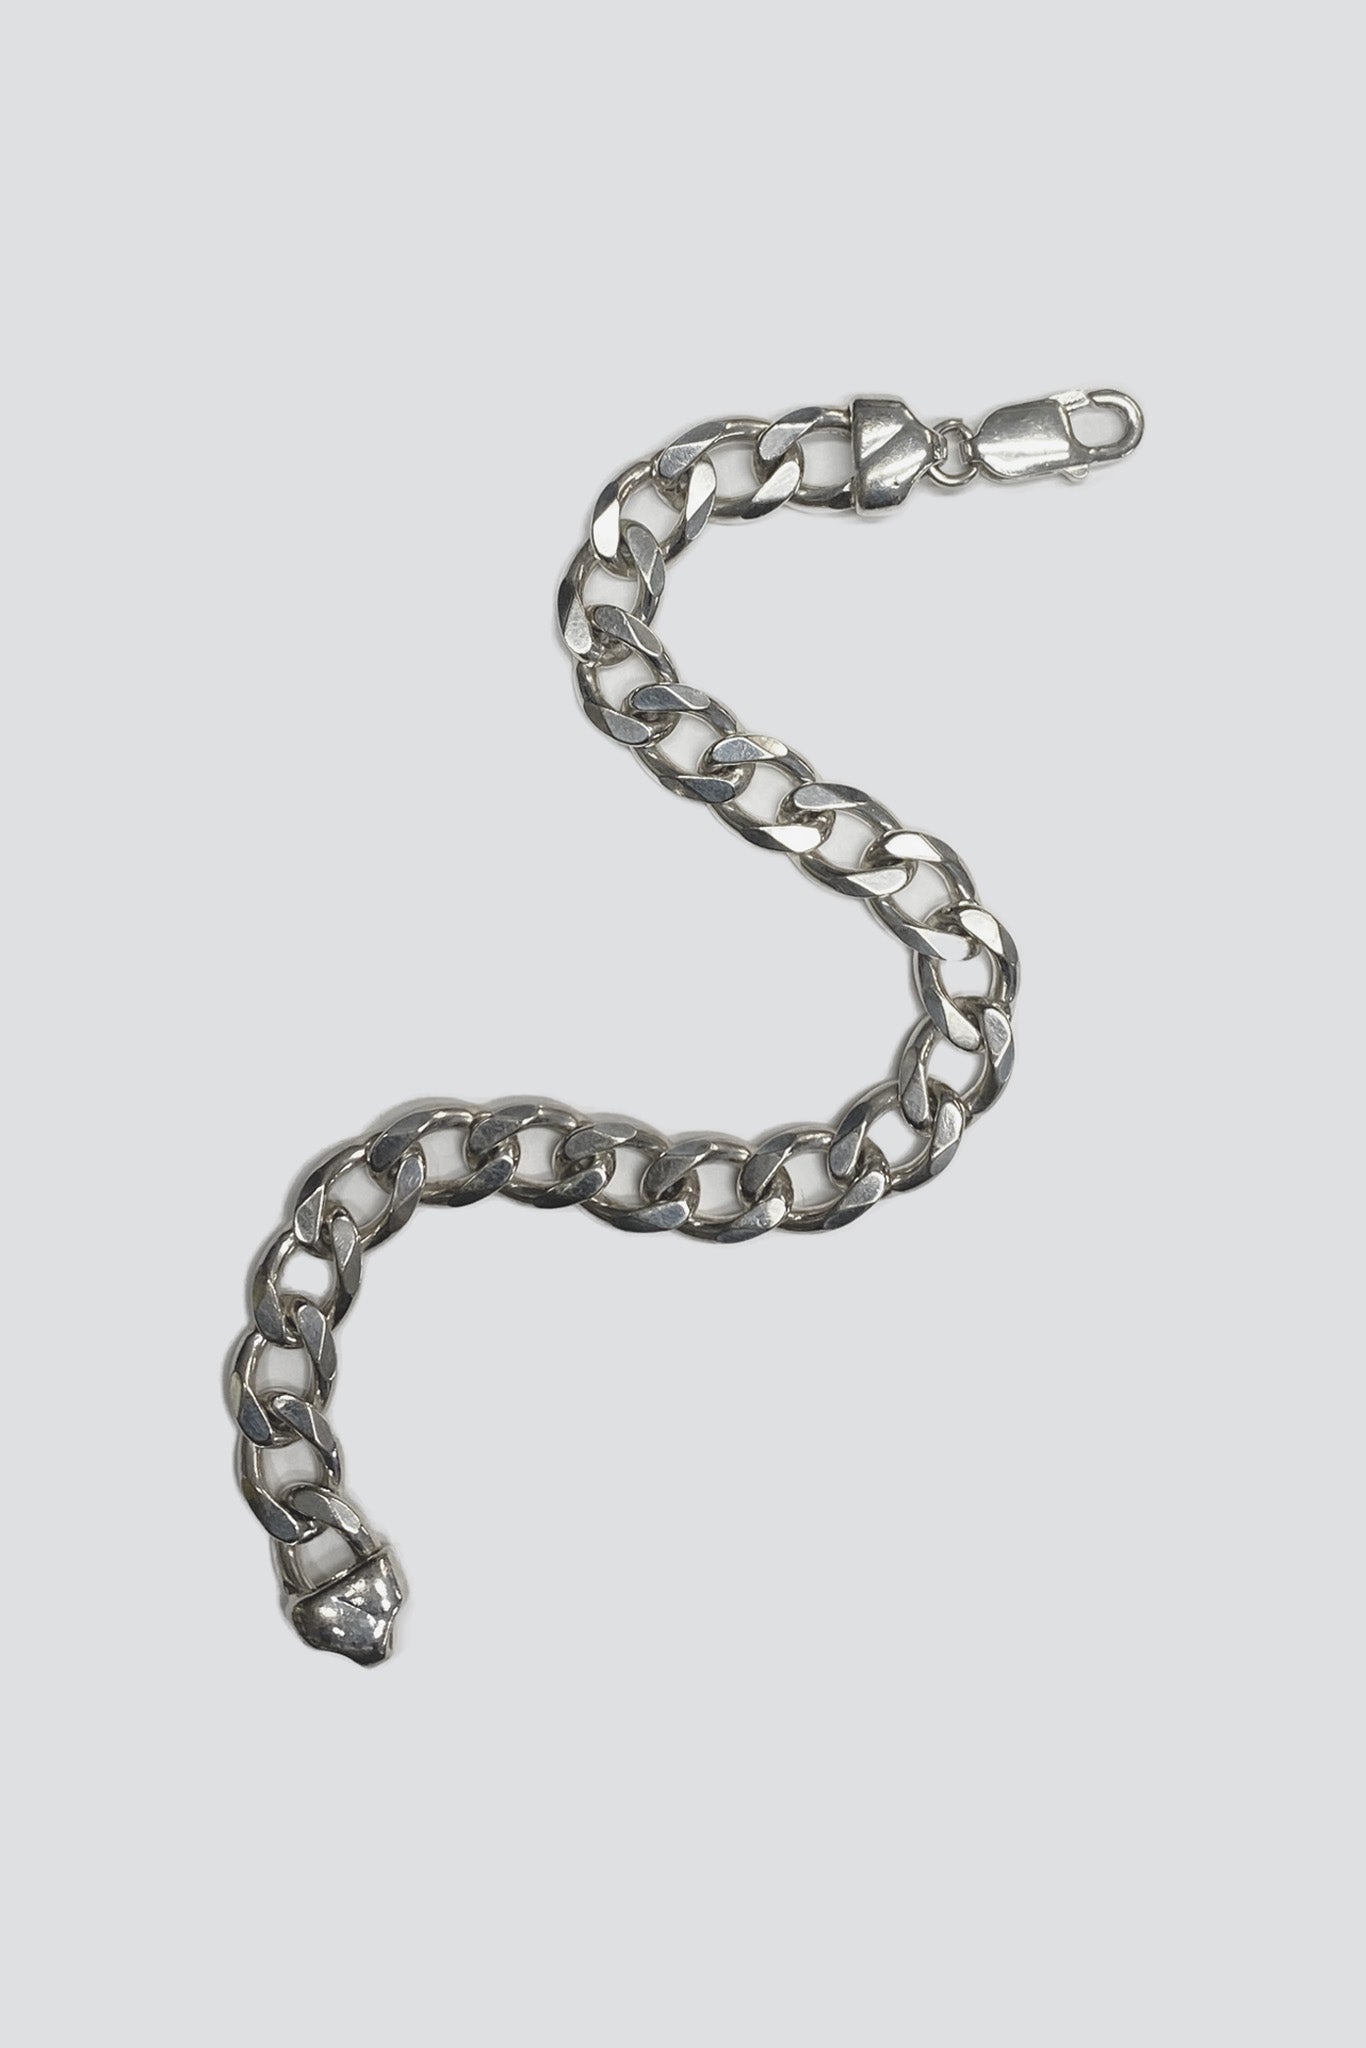 Sterling Silver 8mm Curb Chain